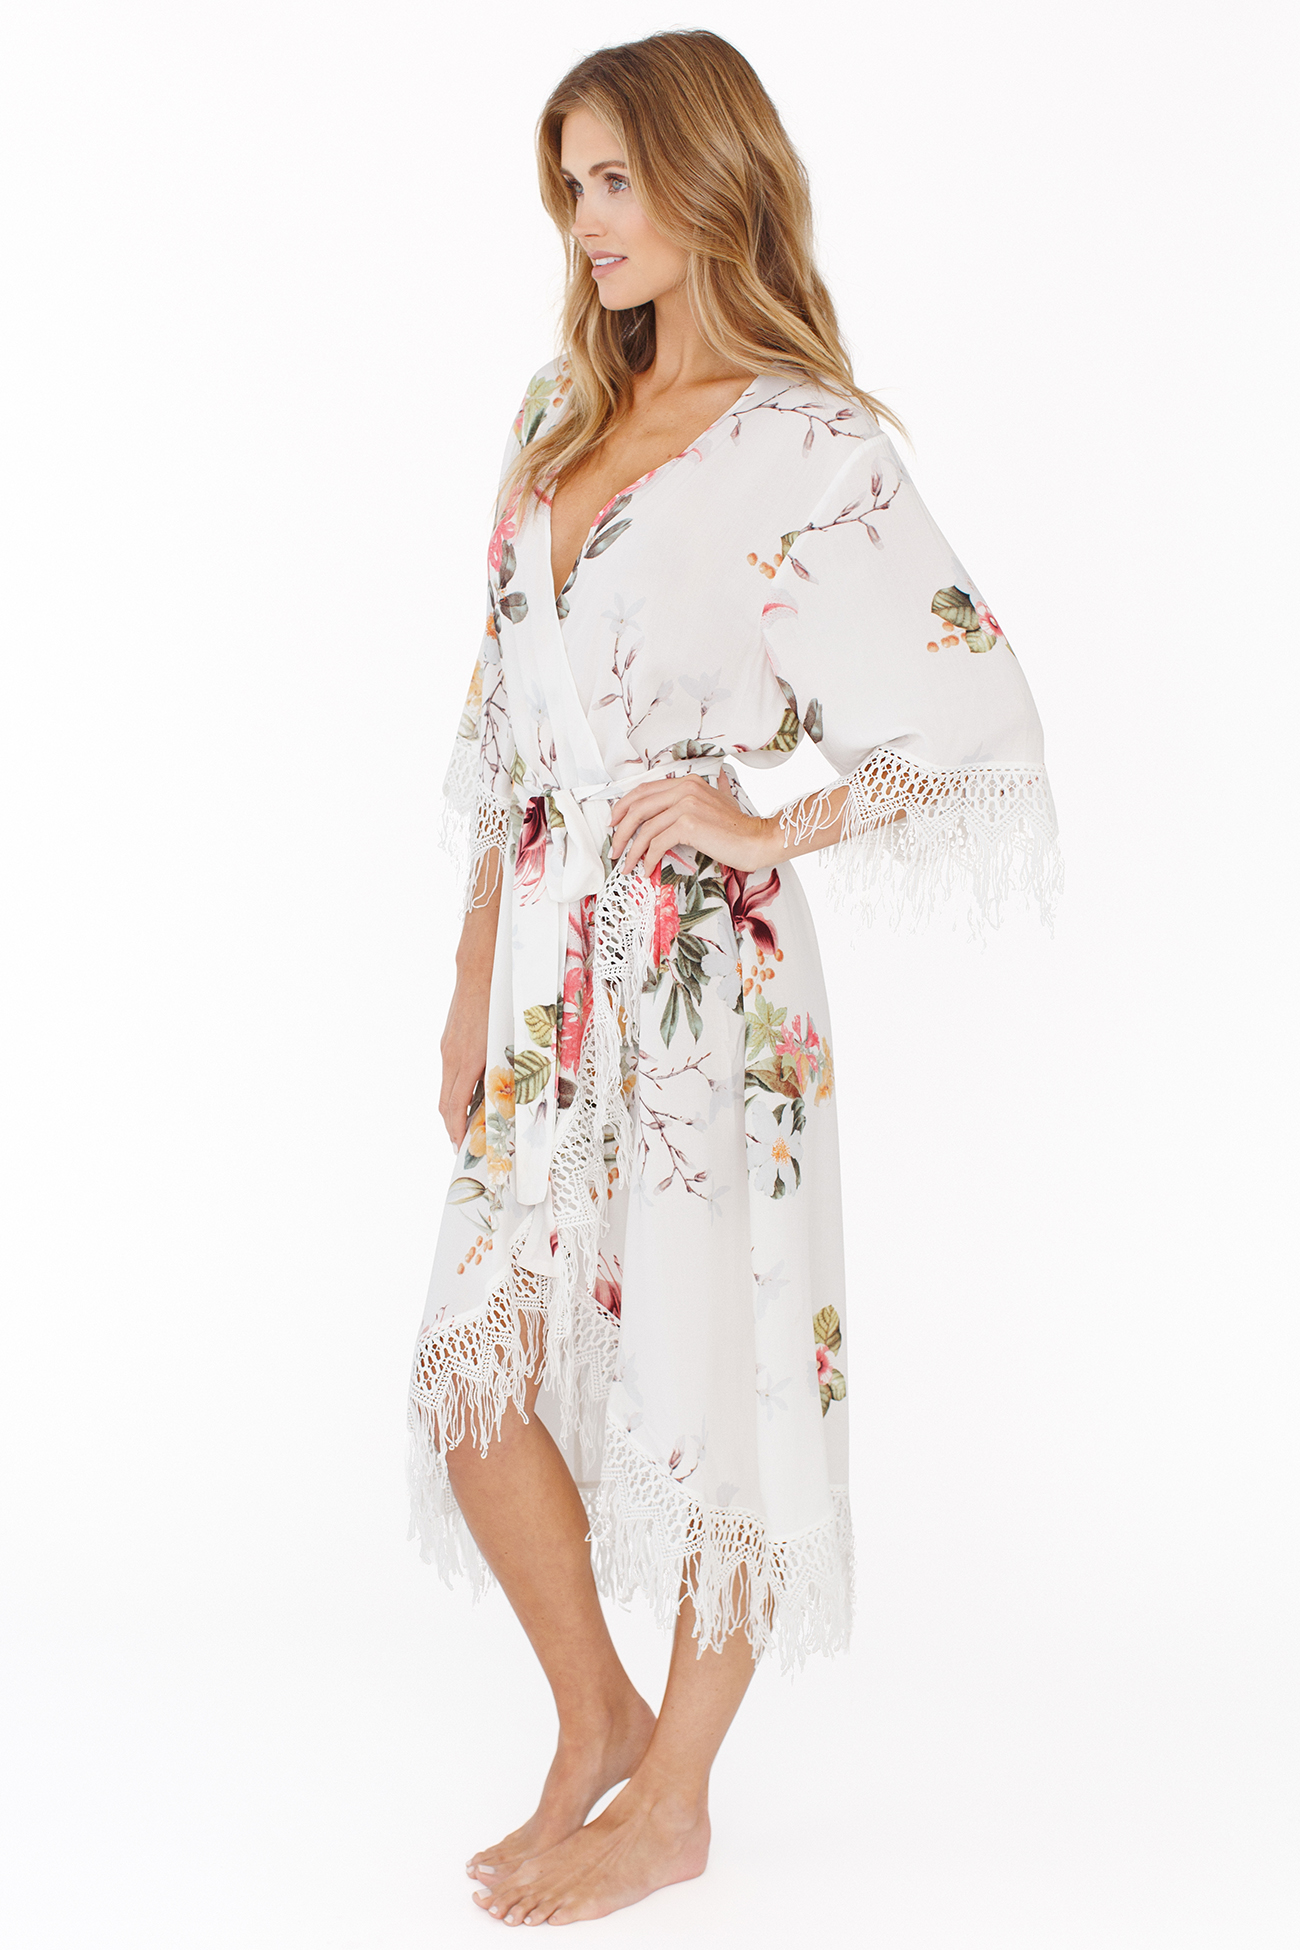 floral robe for bridesmaids and bride, fringed robe, white robe